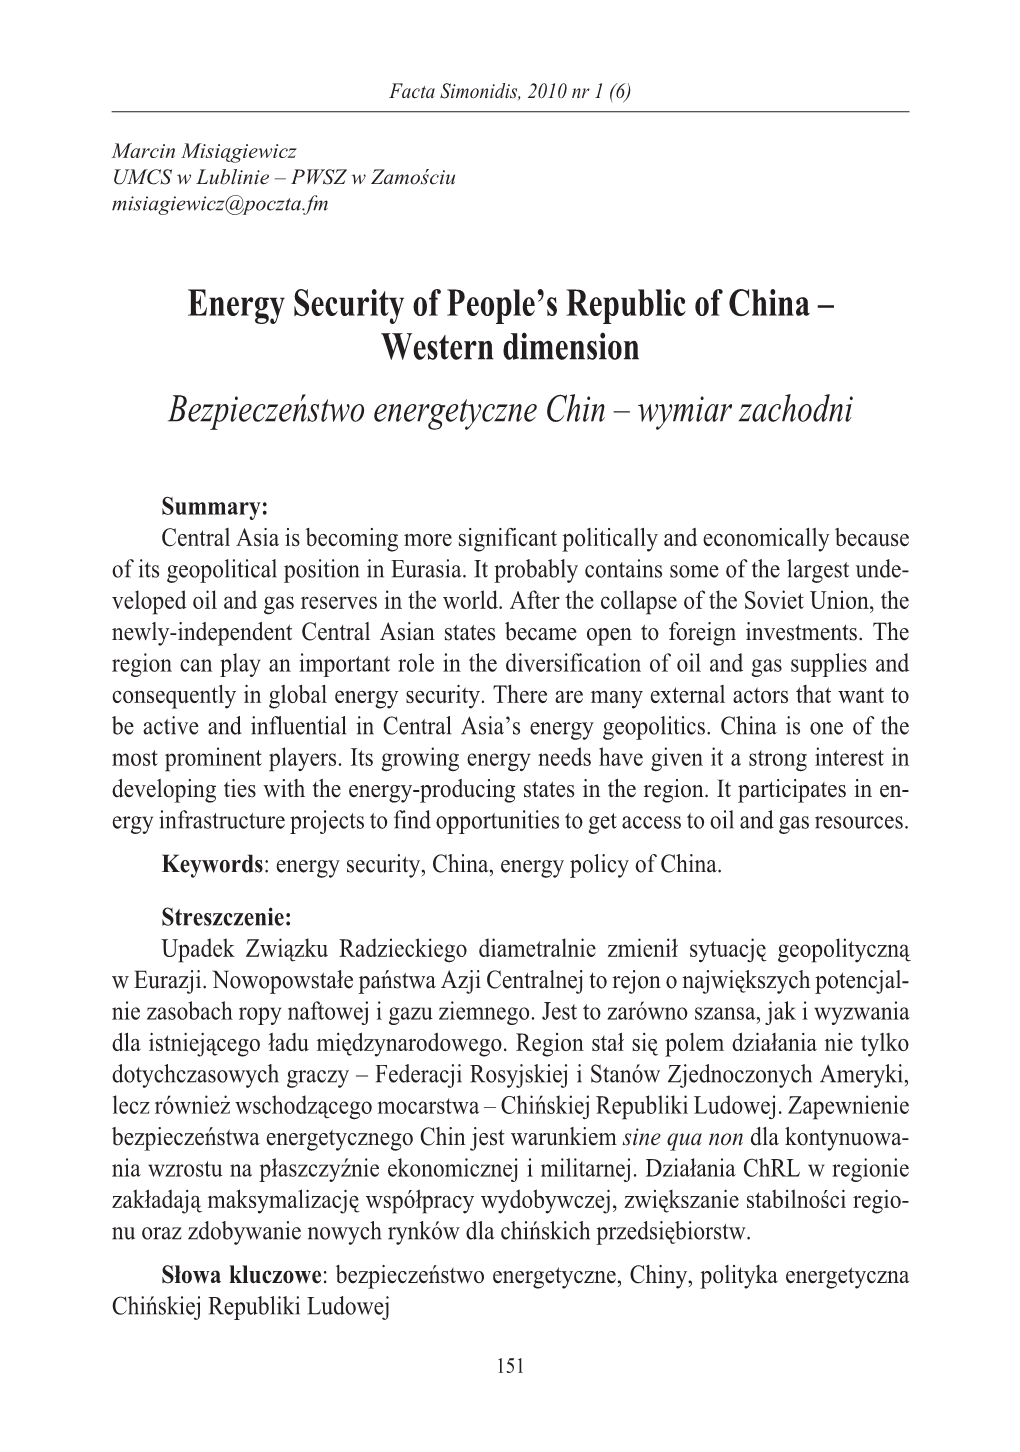 Energy Security of People's Republic of China